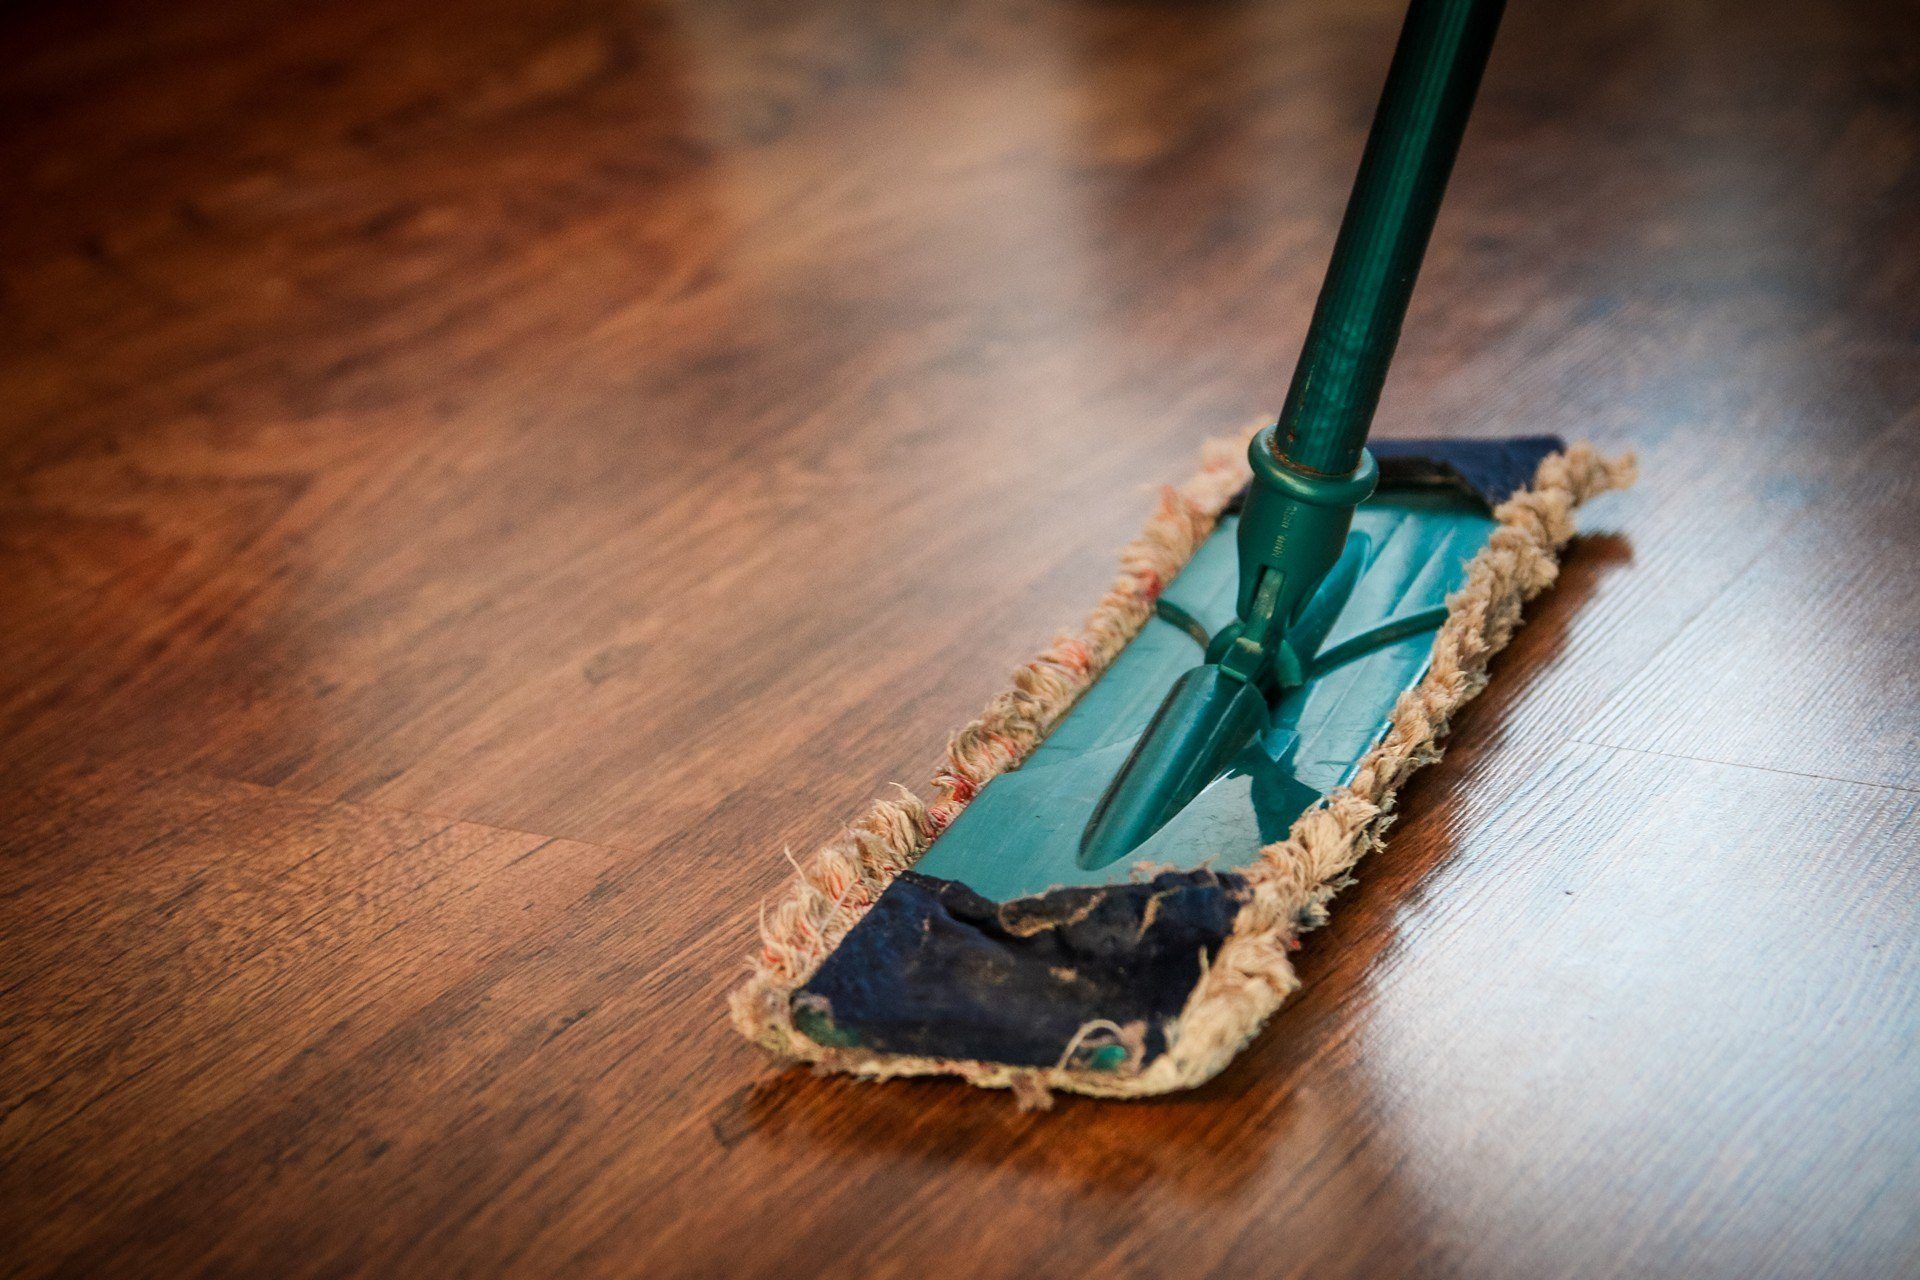 The best NYC commercial cleaning includes conscientious floor care.